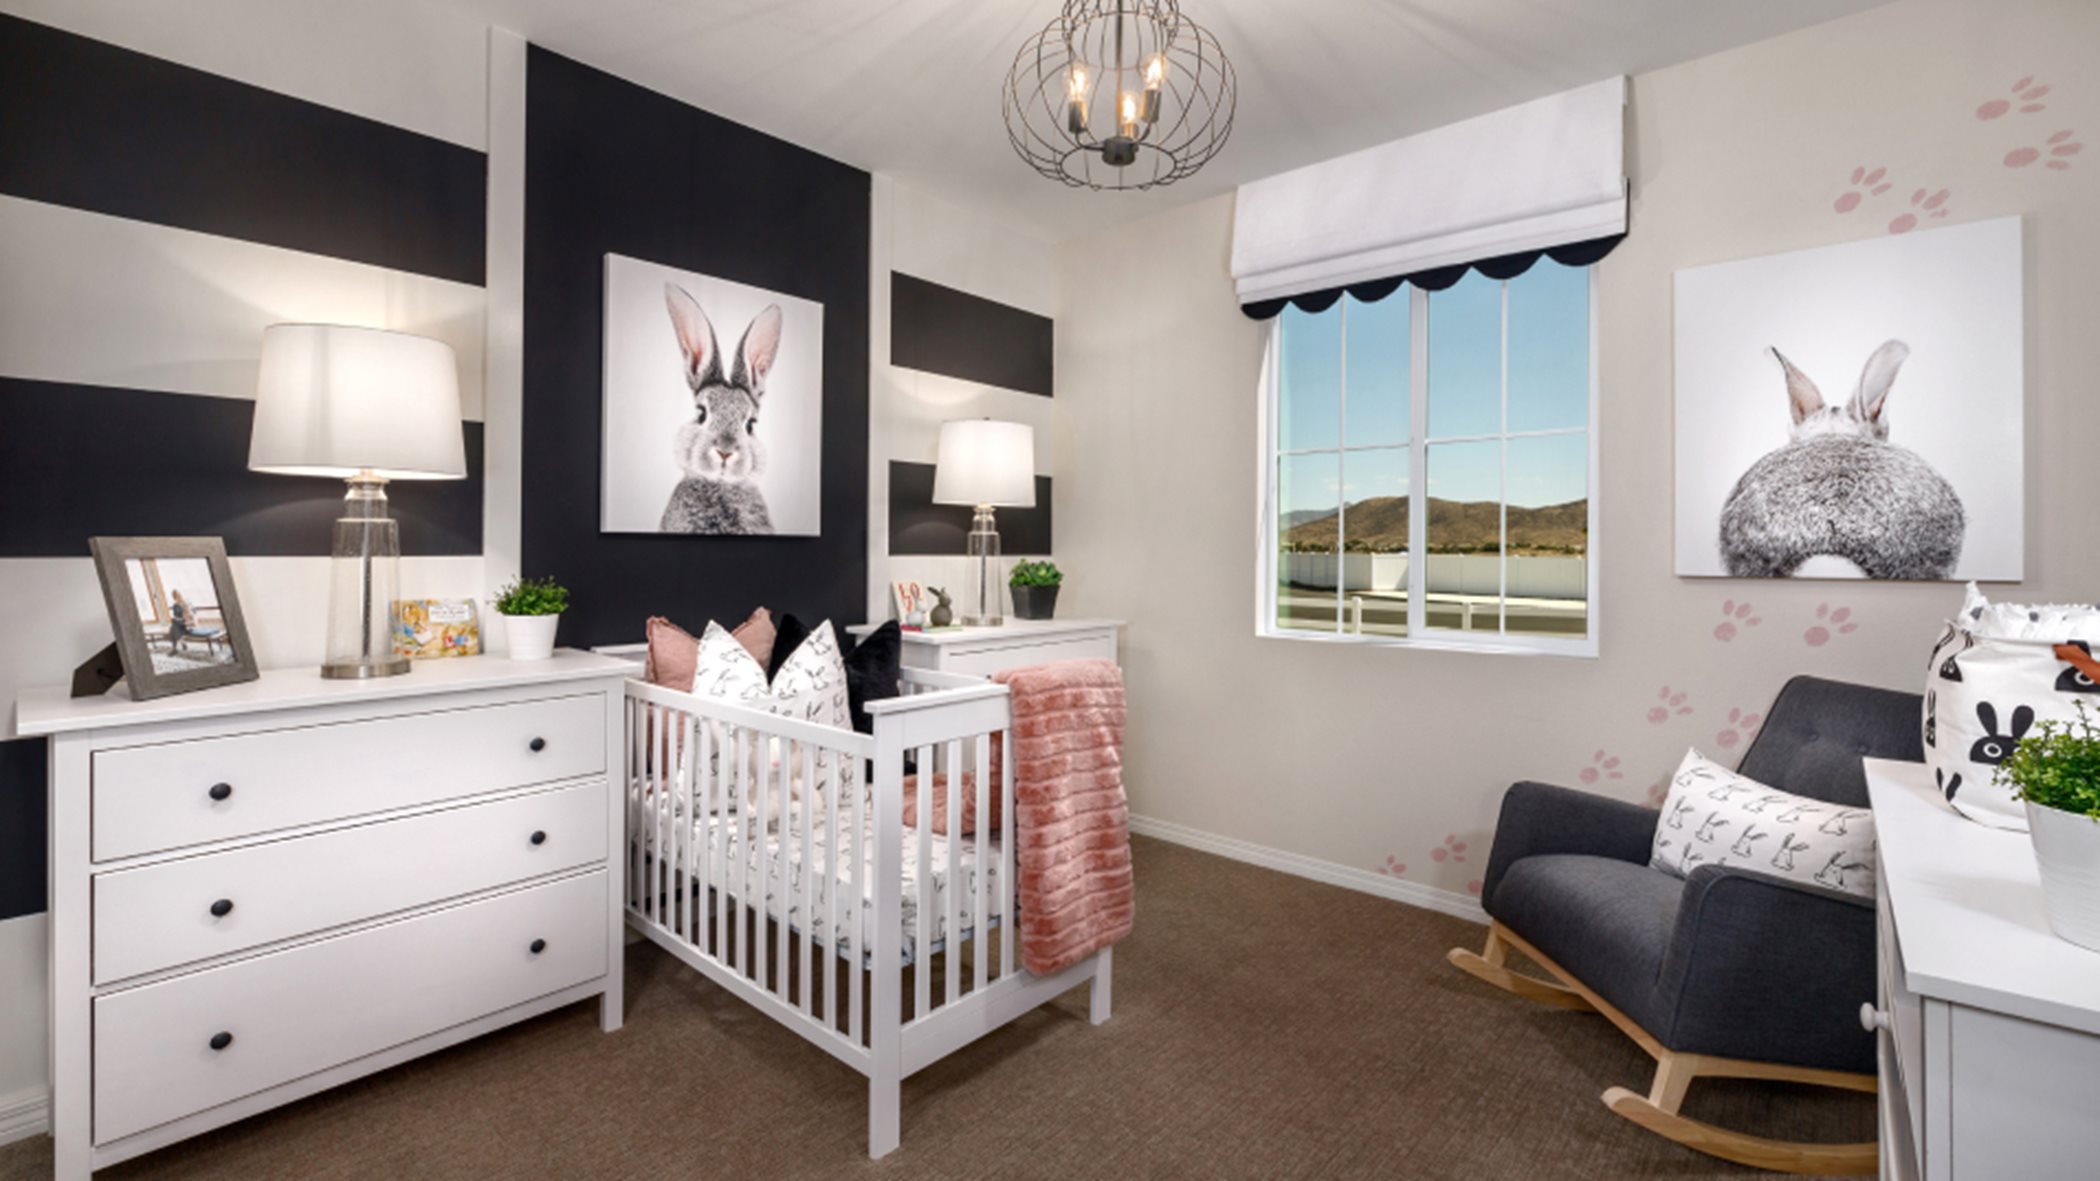 Furnished bedroom with crib